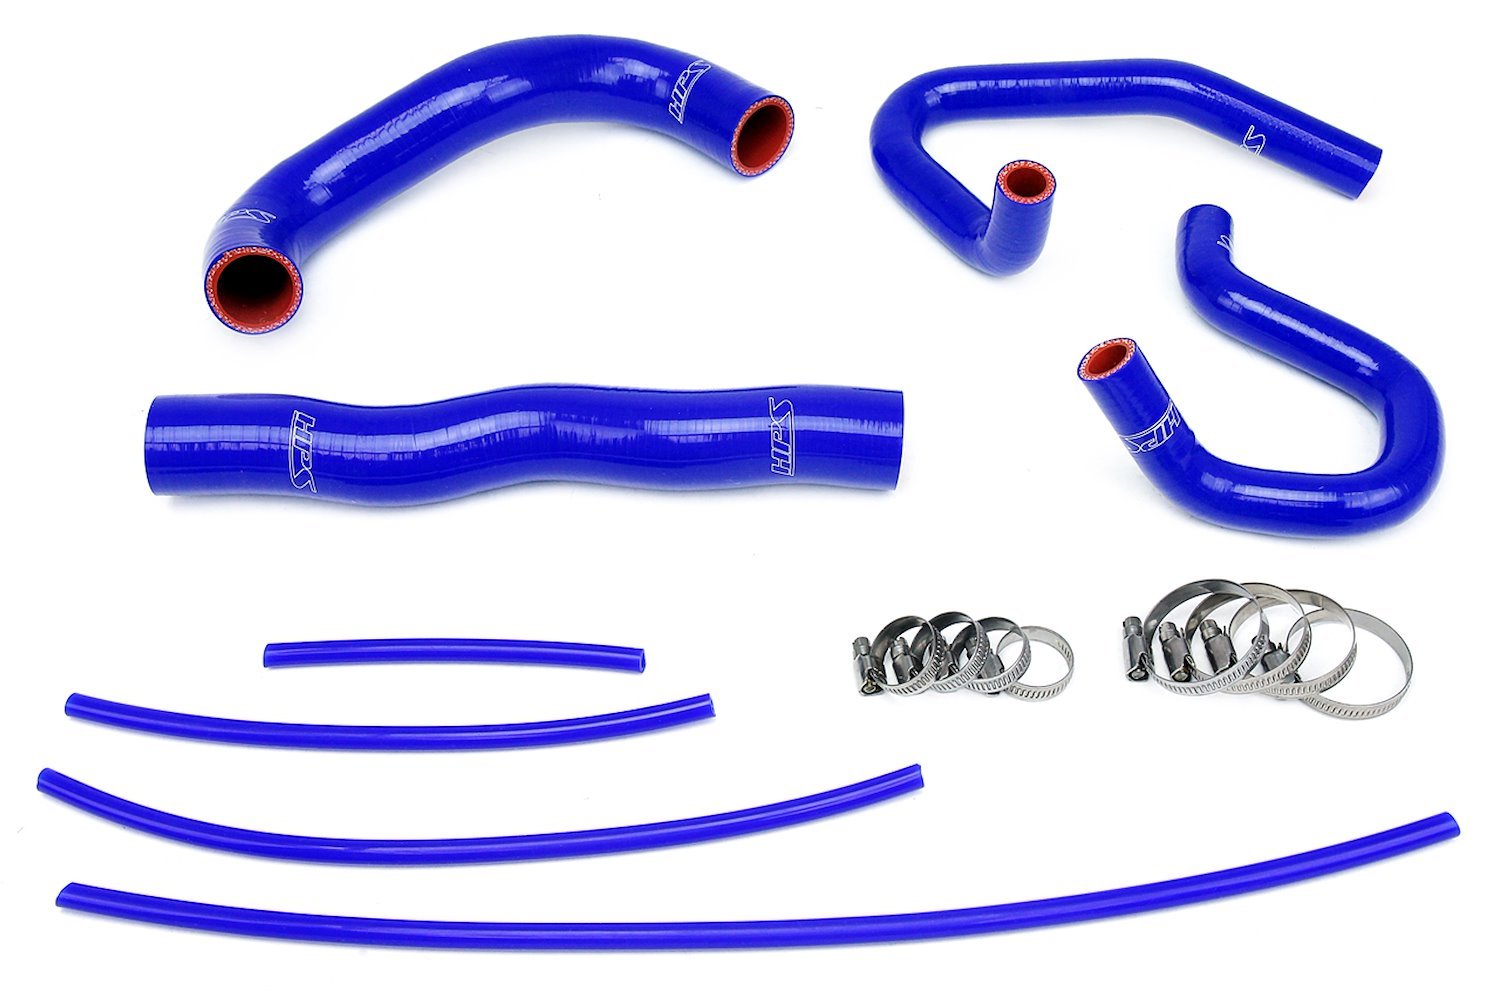 57-1324-BLUE Coolant Hose Kit, High-Temp 3-Ply Reinforced Silicone, Replace Rubber Radiator Heater Coolant Hoses